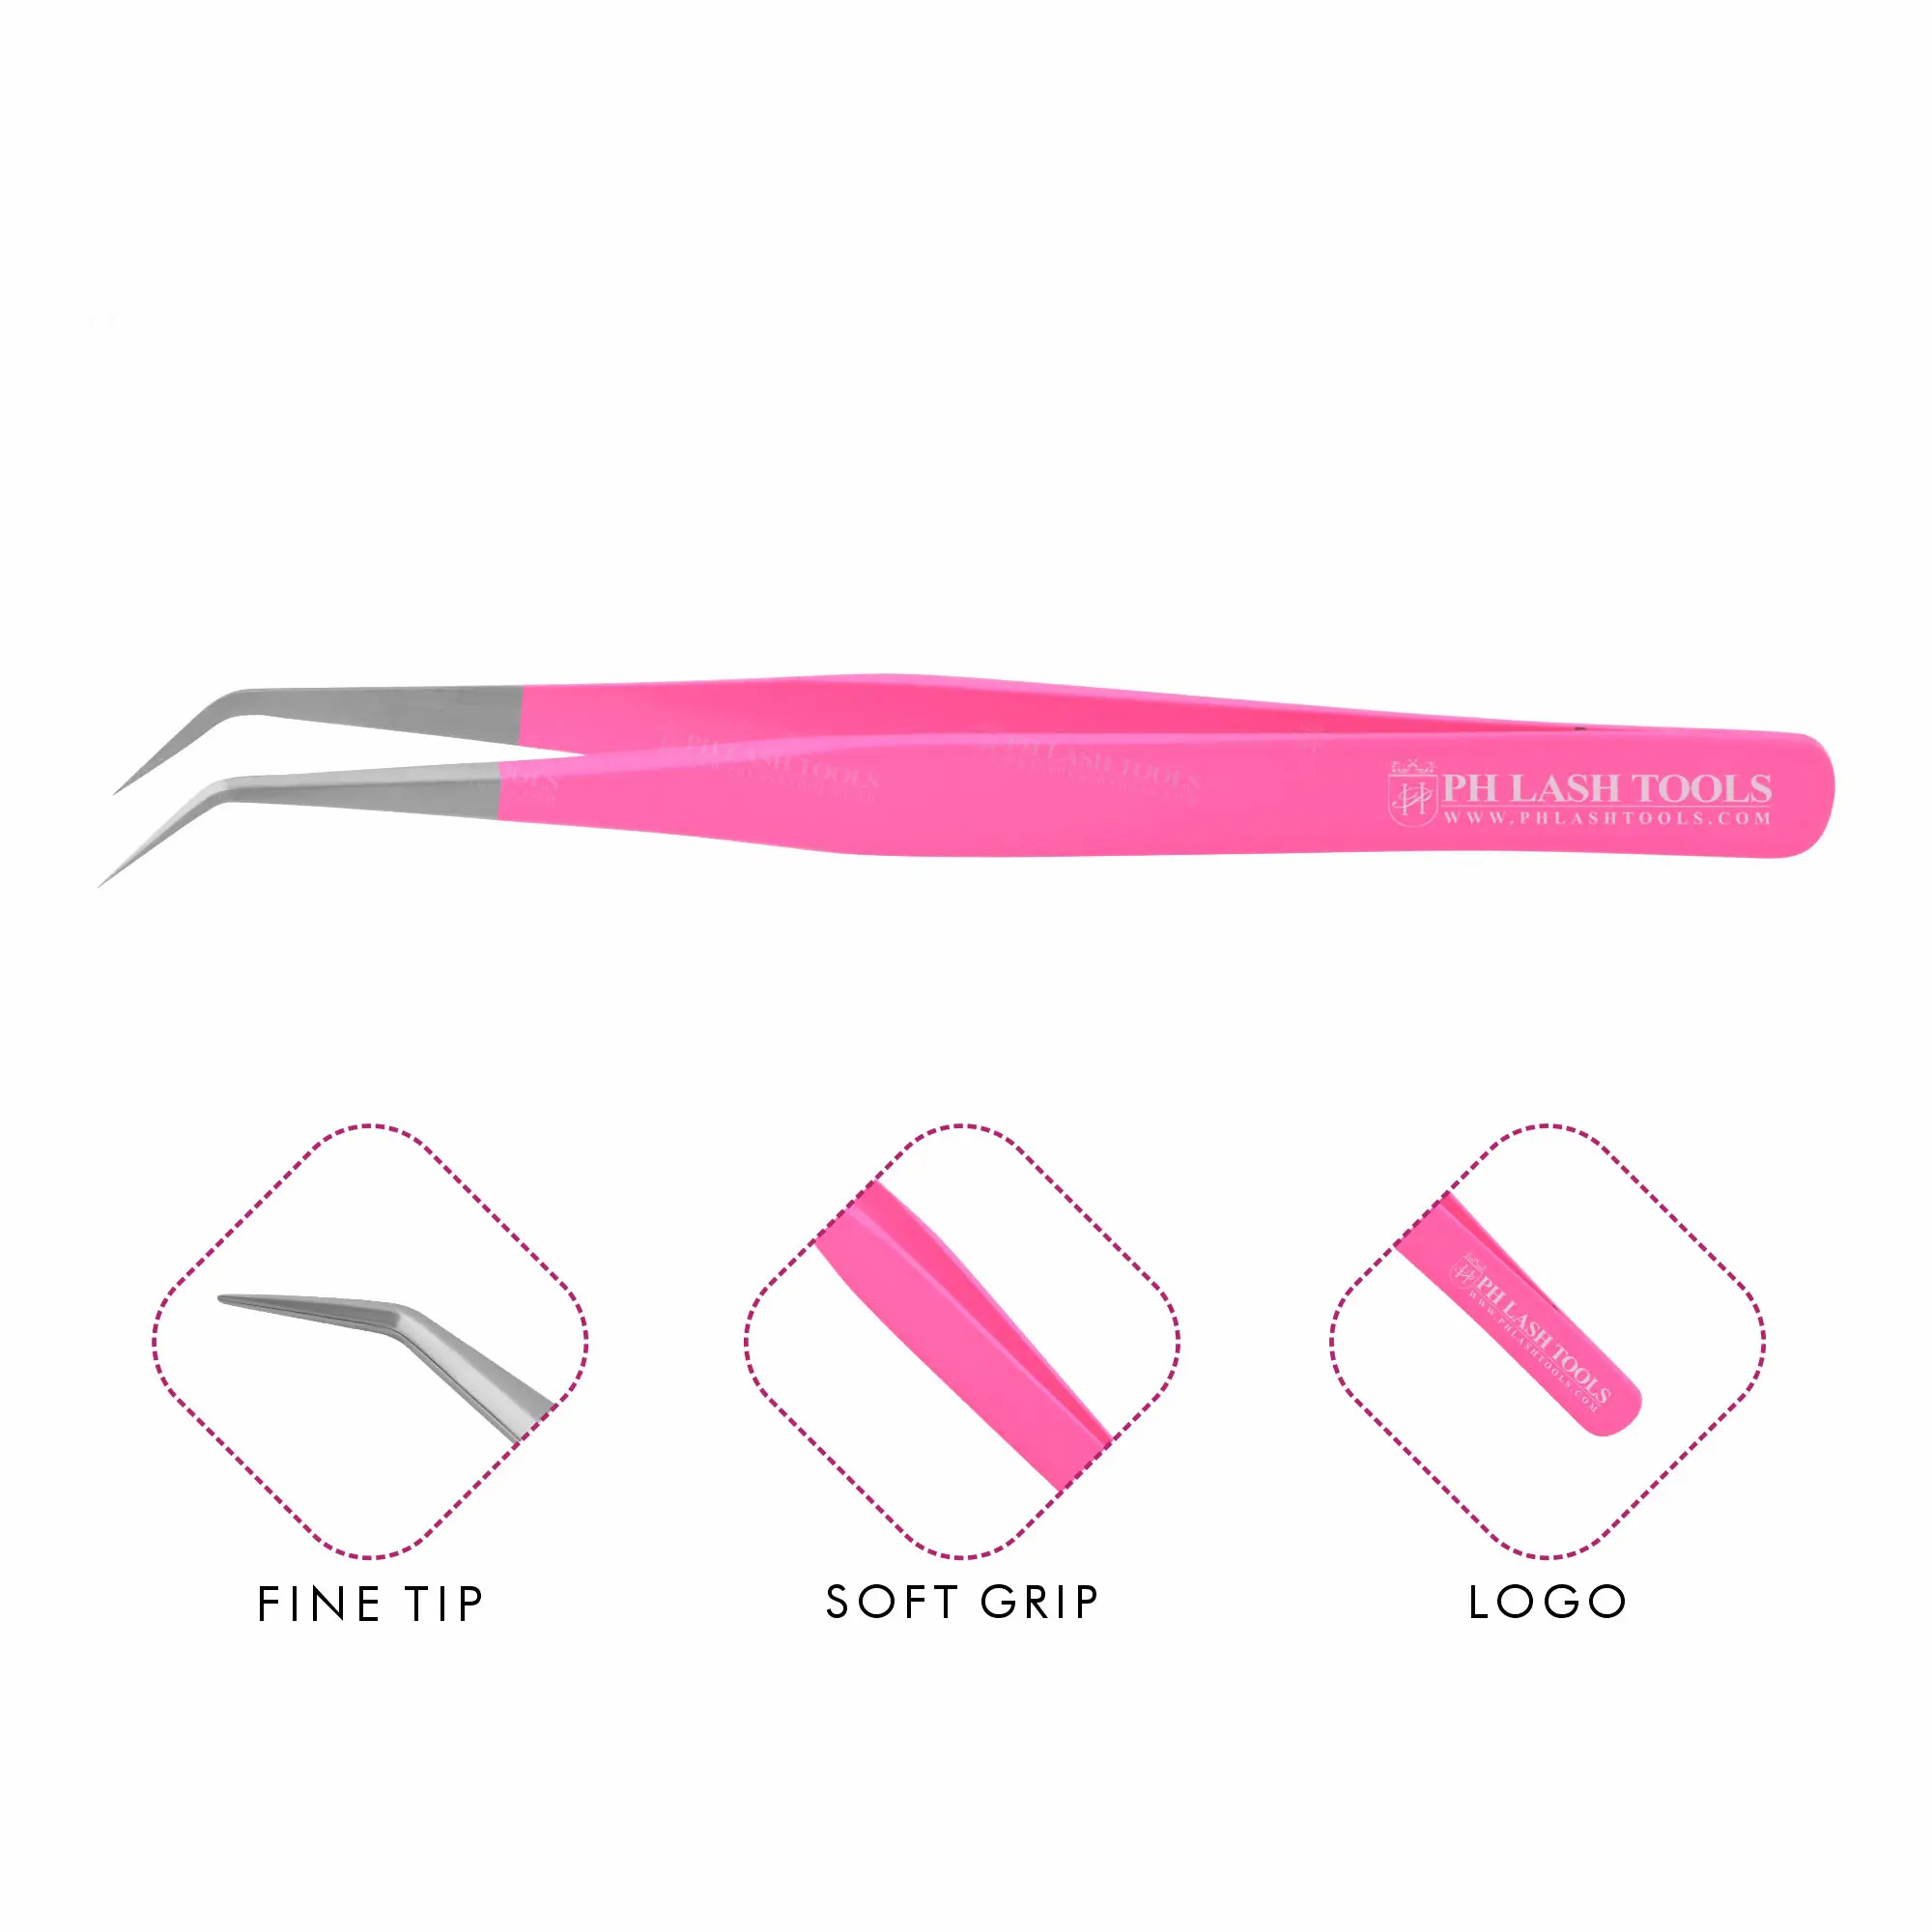 Tip Satin and Pink Color Private Label Eyelash Tweezers, Eyelash Extension Tweezer with private label by PH Lash Tools